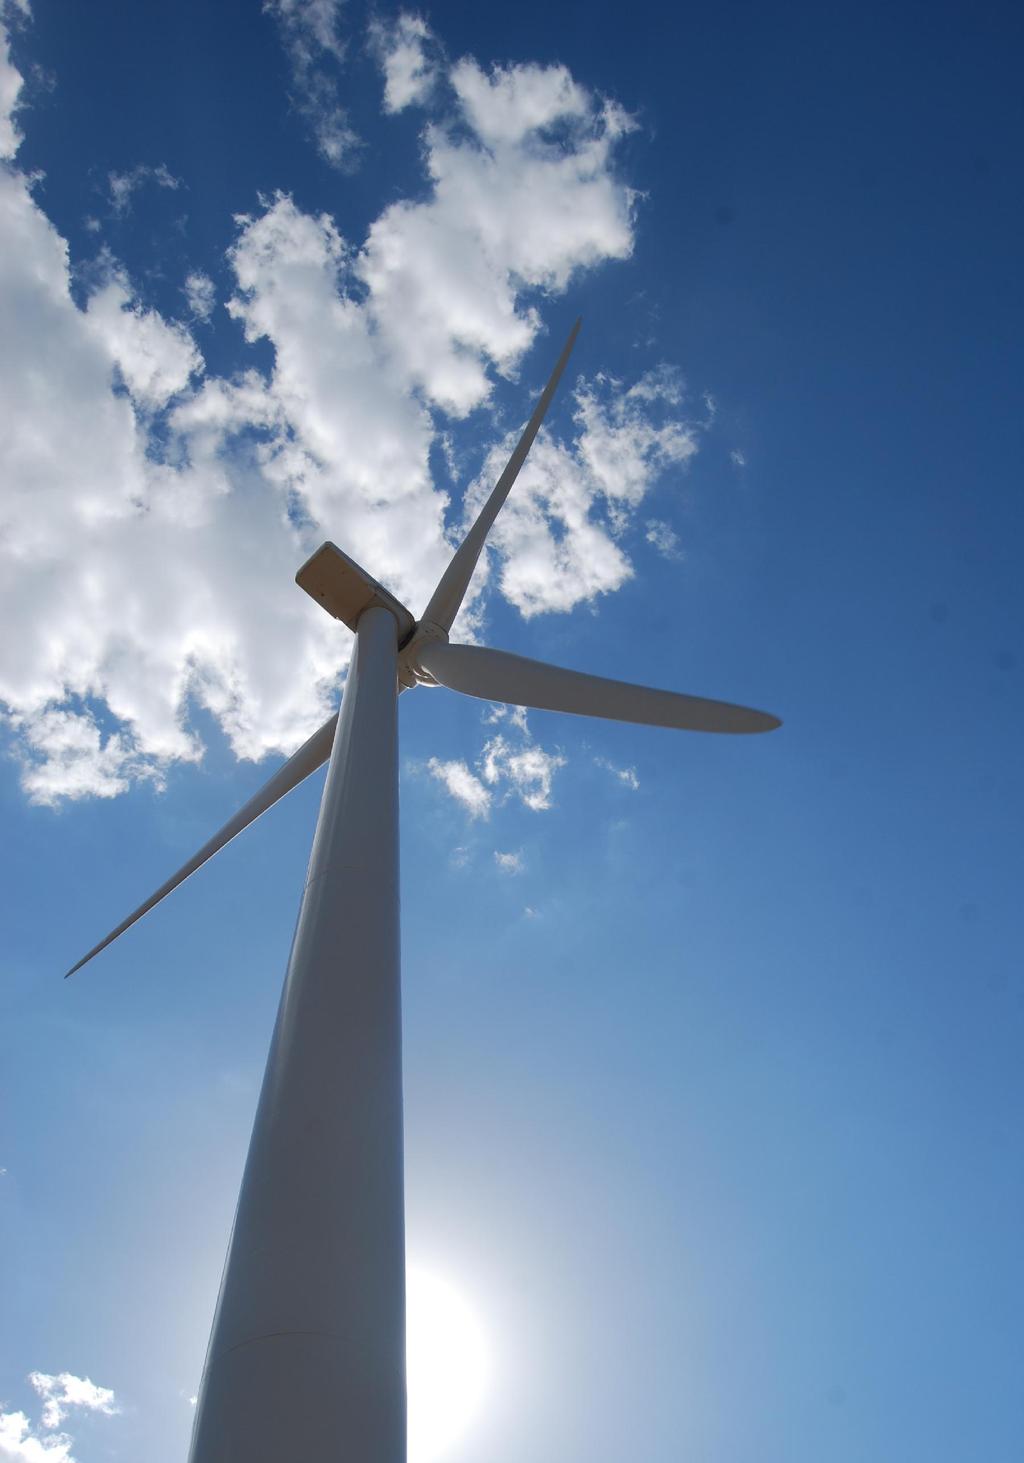 MT EMERALD WIND FARM REVISED A-WEIGHTED NOISE